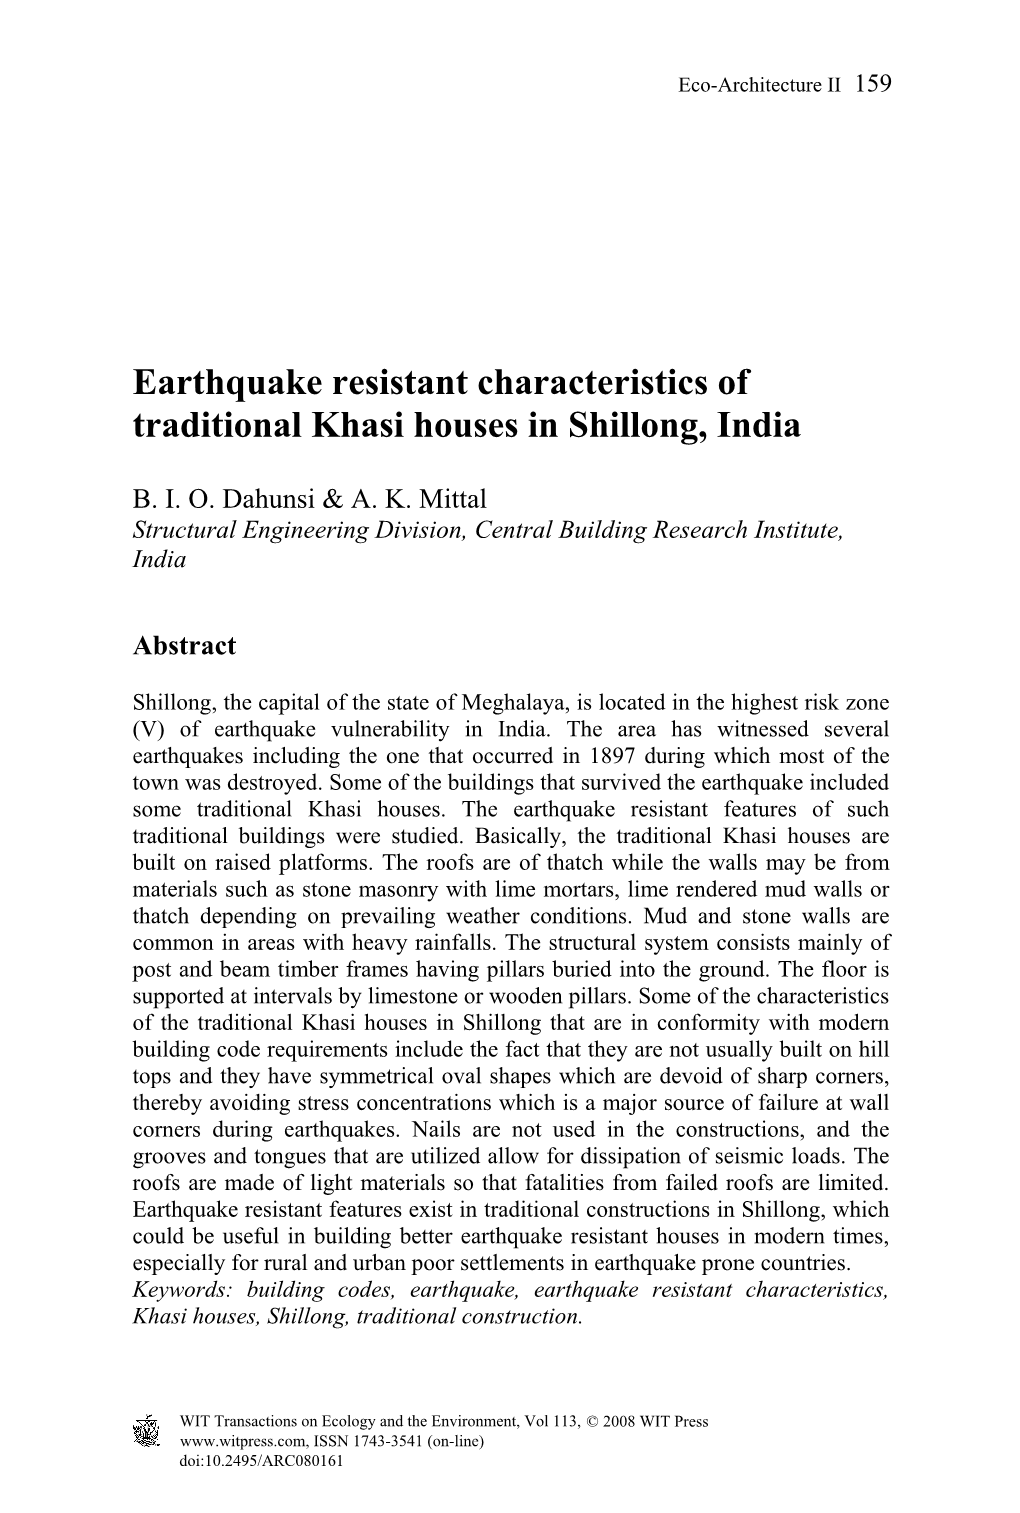 Earthquake Resistant Characteristics of Traditional Khasi Houses in Shillong, India